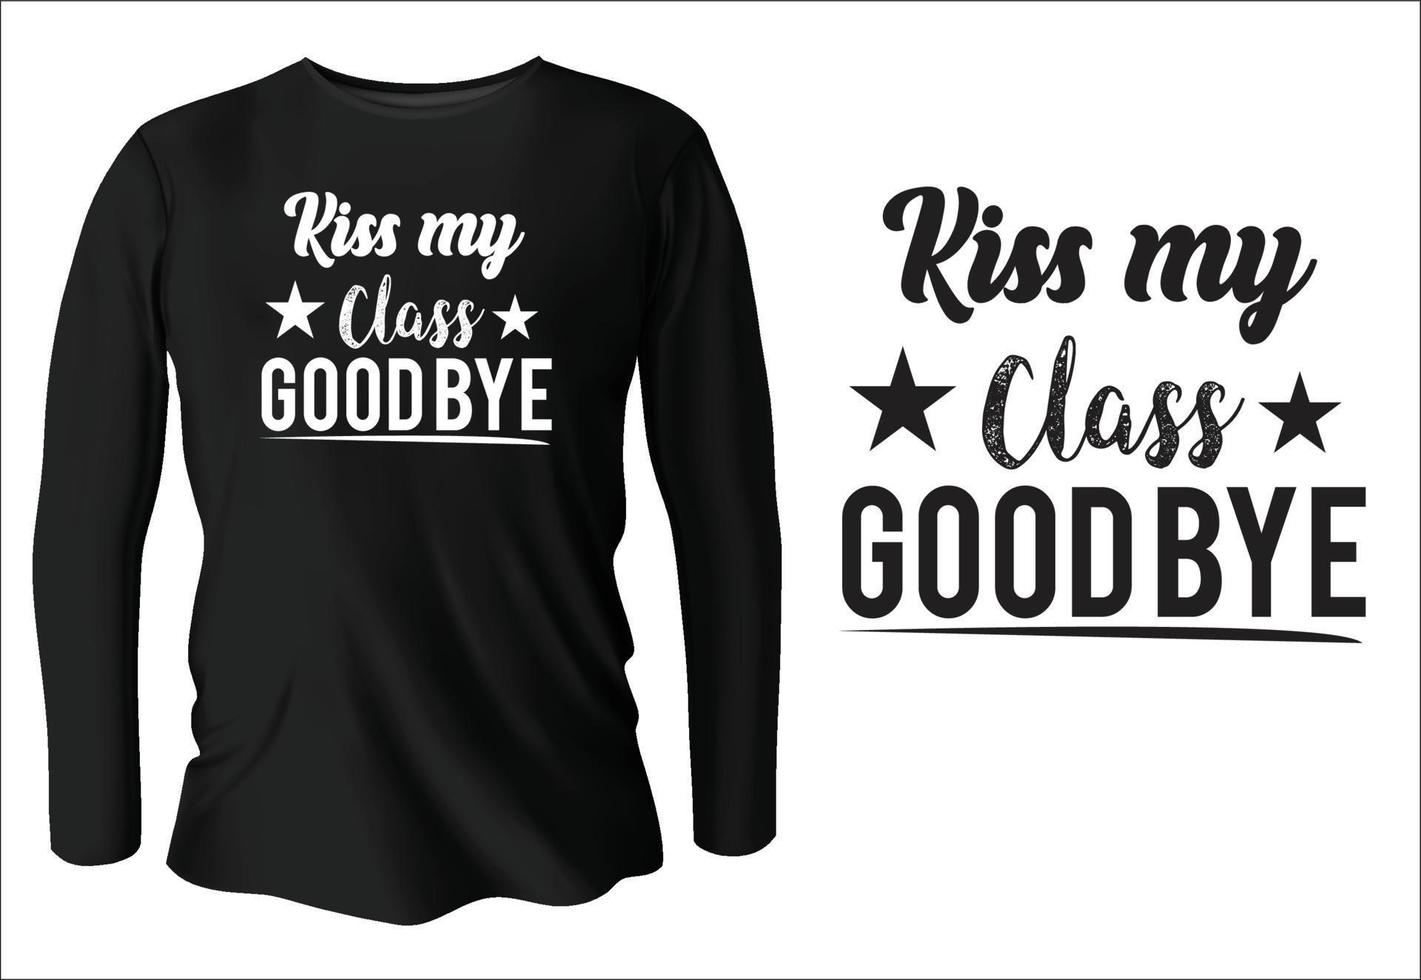 kiss my class good bye t-shirt design with vector